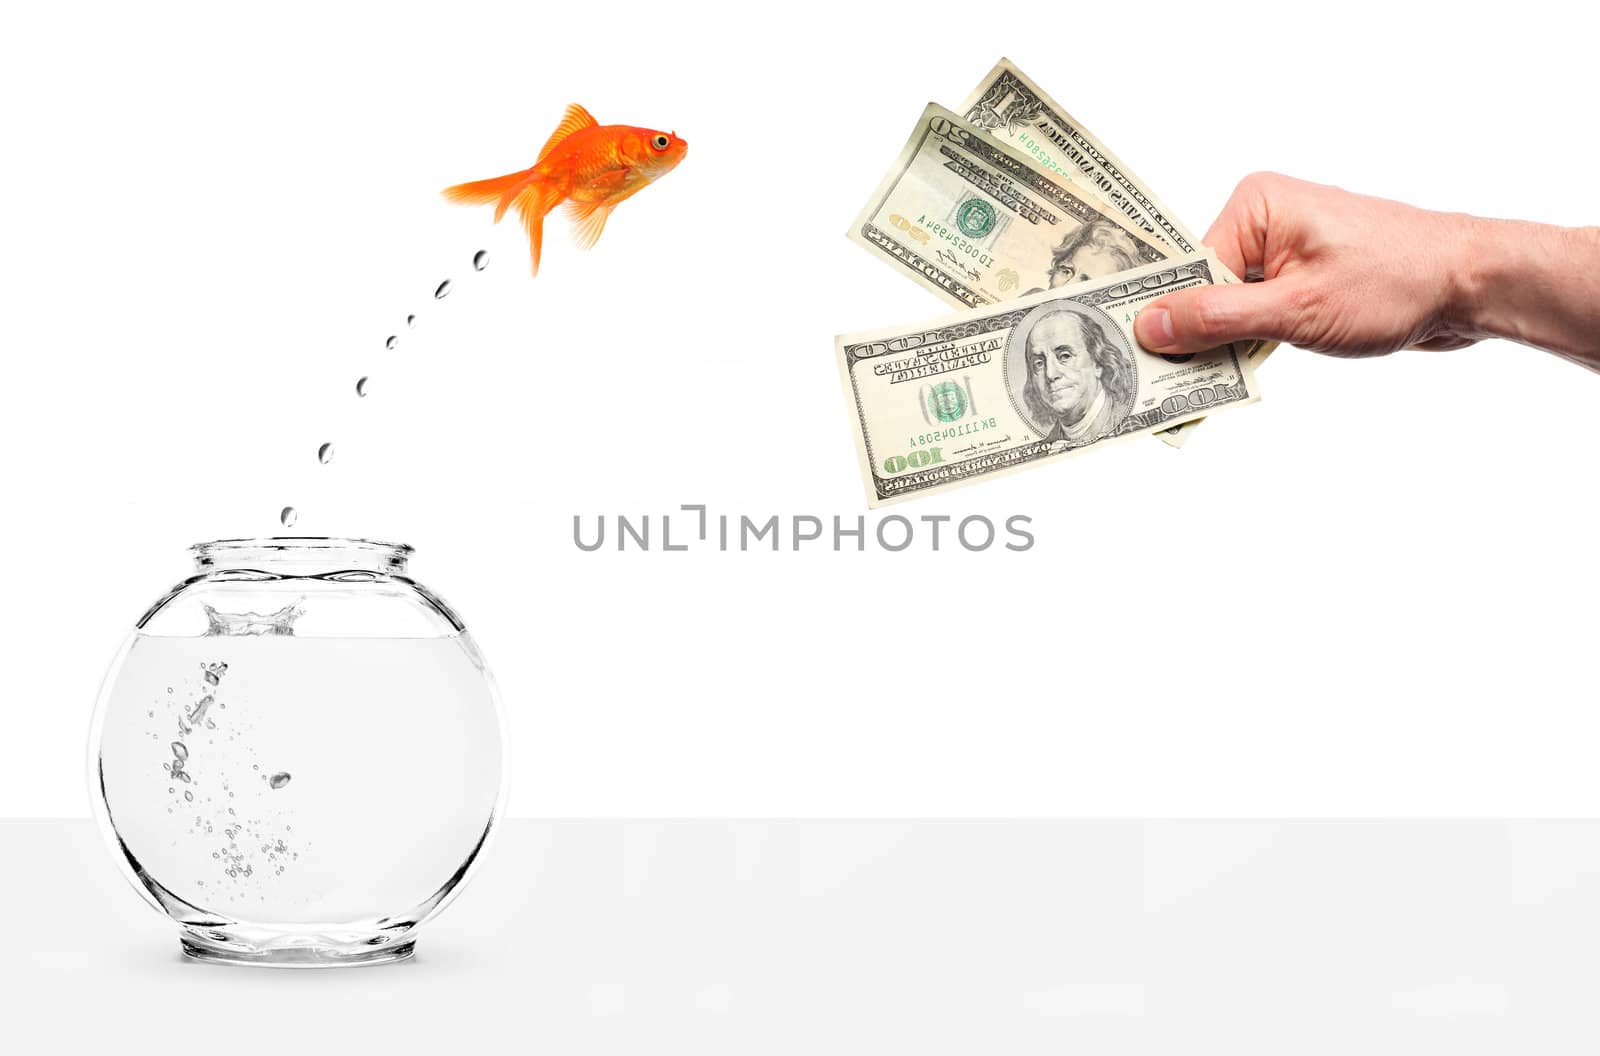 goldfish jumping out of fishbowl temped by cash by jjayo